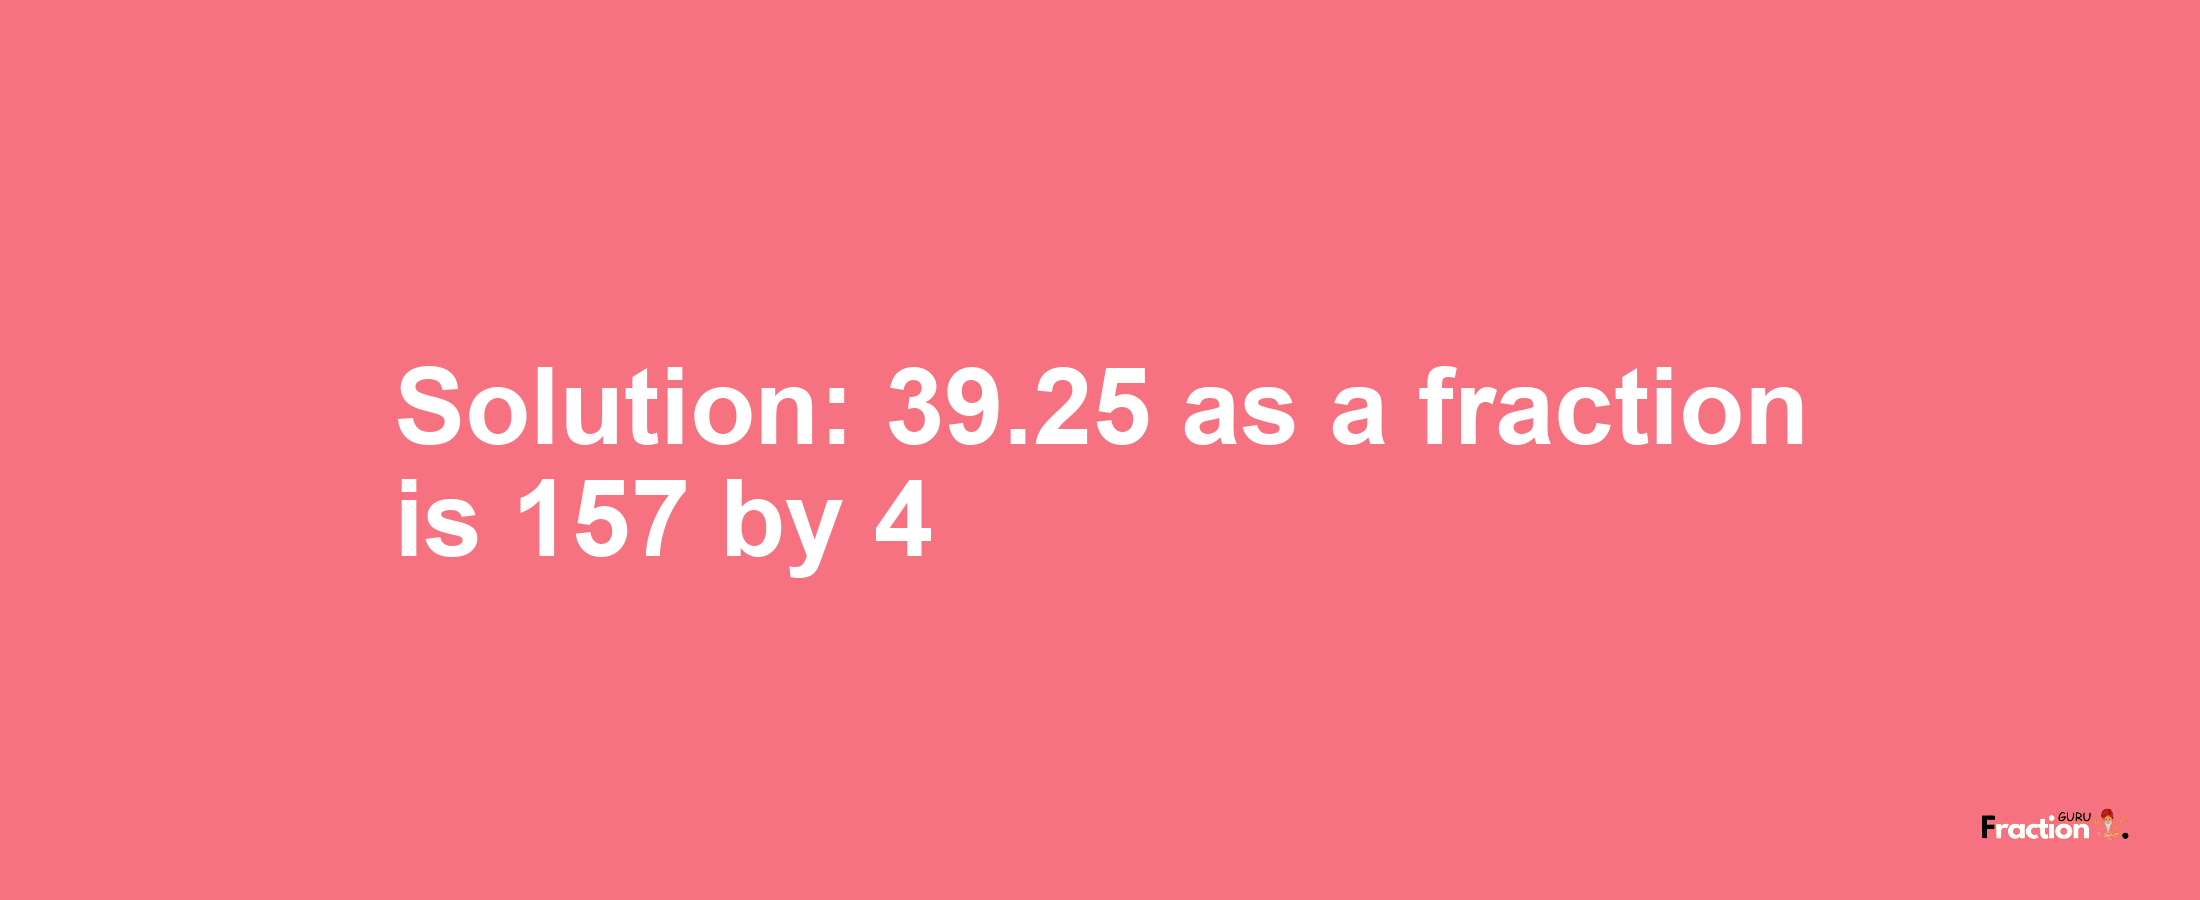 Solution:39.25 as a fraction is 157/4